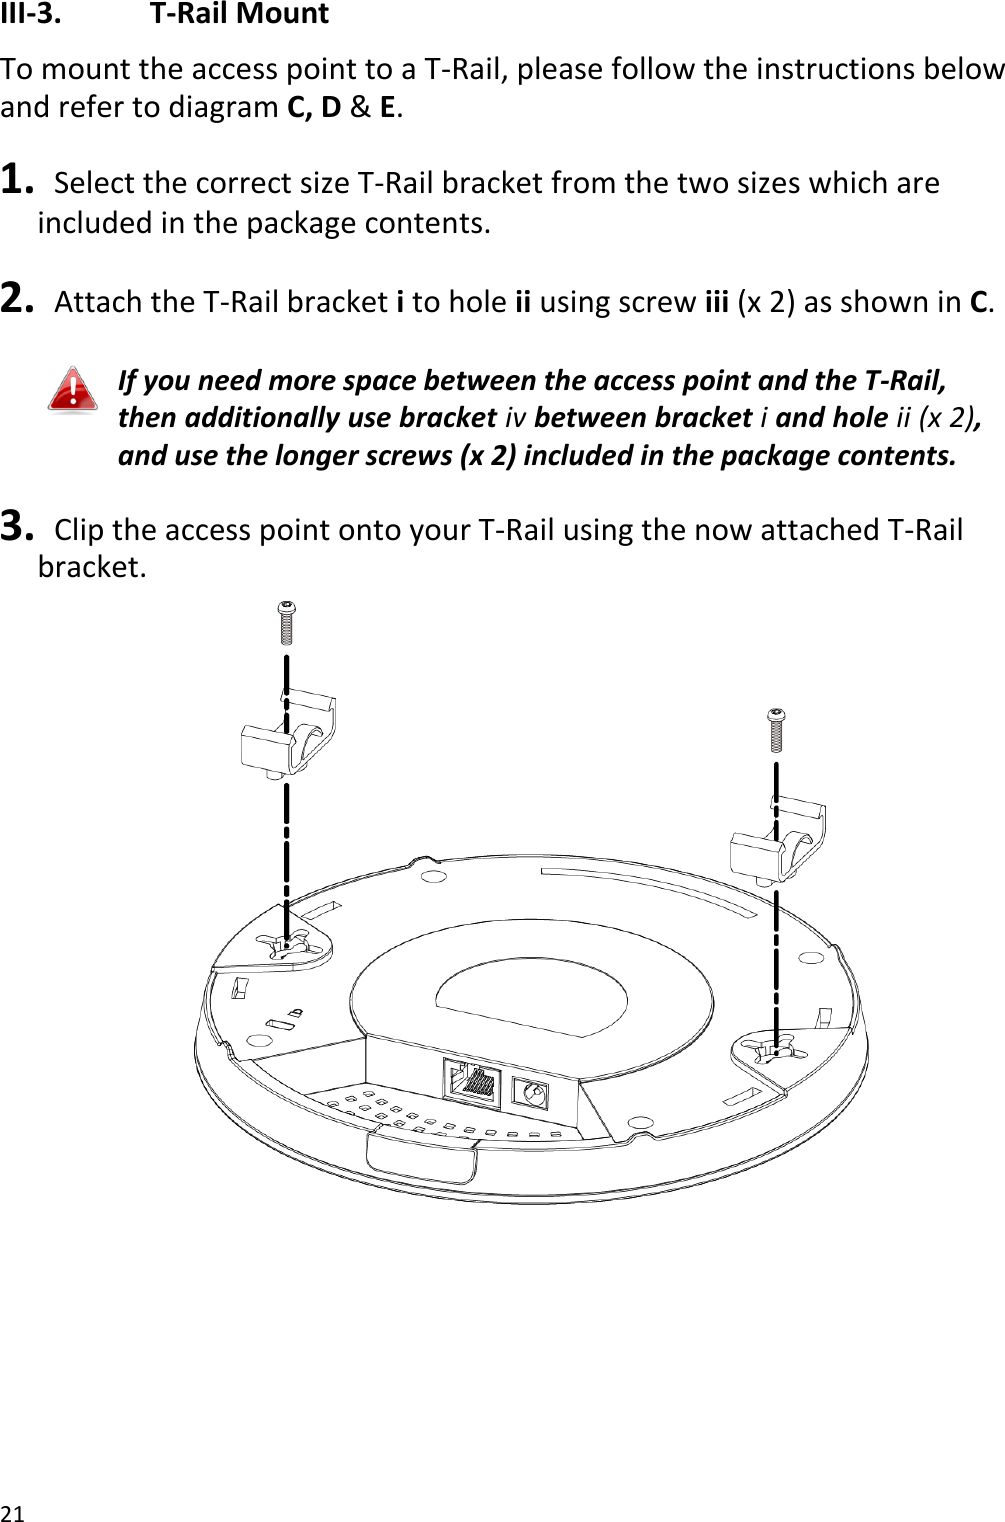 21  III-3.    T-Rail Mount To mount the access point to a T-Rail, please follow the instructions below and refer to diagram C, D &amp; E.  1.   Select the correct size T-Rail bracket from the two sizes which are included in the package contents.  2.   Attach the T-Rail bracket i to hole ii using screw iii (x 2) as shown in C.  If you need more space between the access point and the T-Rail, then additionally use bracket iv between bracket i and hole ii (x 2), and use the longer screws (x 2) included in the package contents.  3.   Clip the access point onto your T-Rail using the now attached T-Rail bracket.  